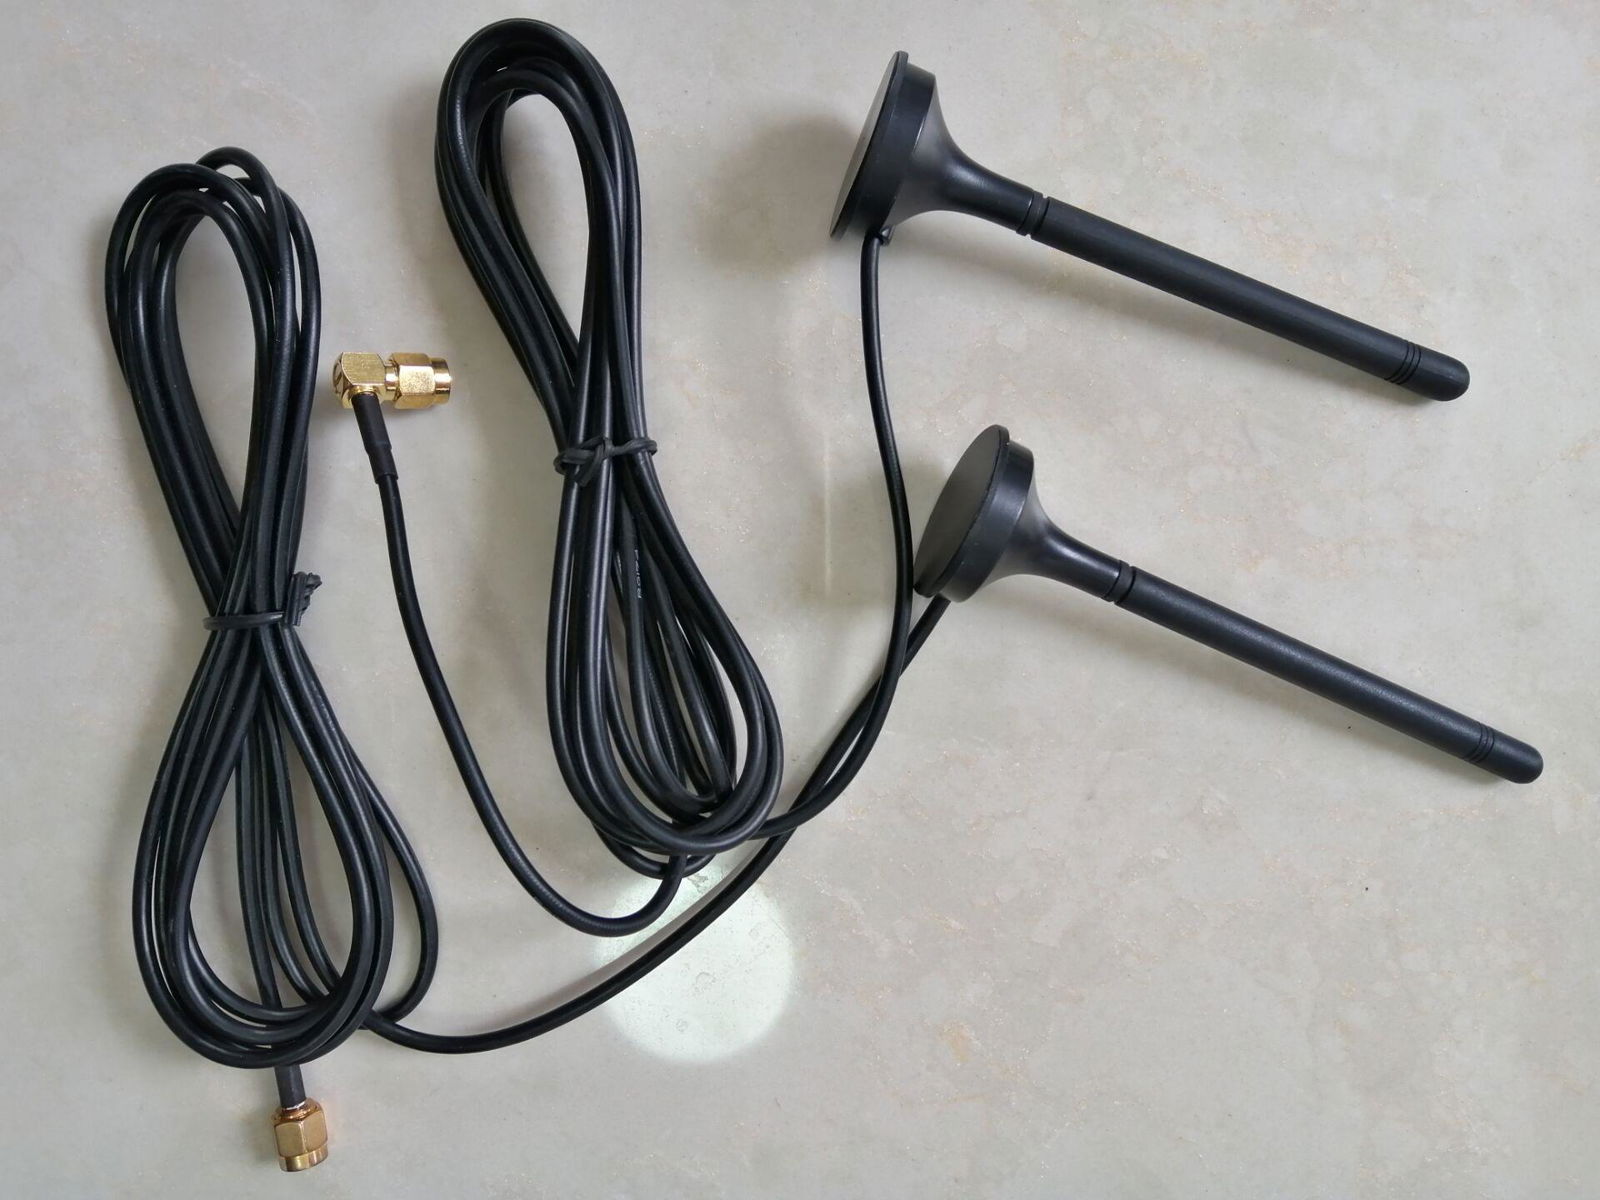 4G/Lte Magnet Antenna with SMA or Fakra Connector